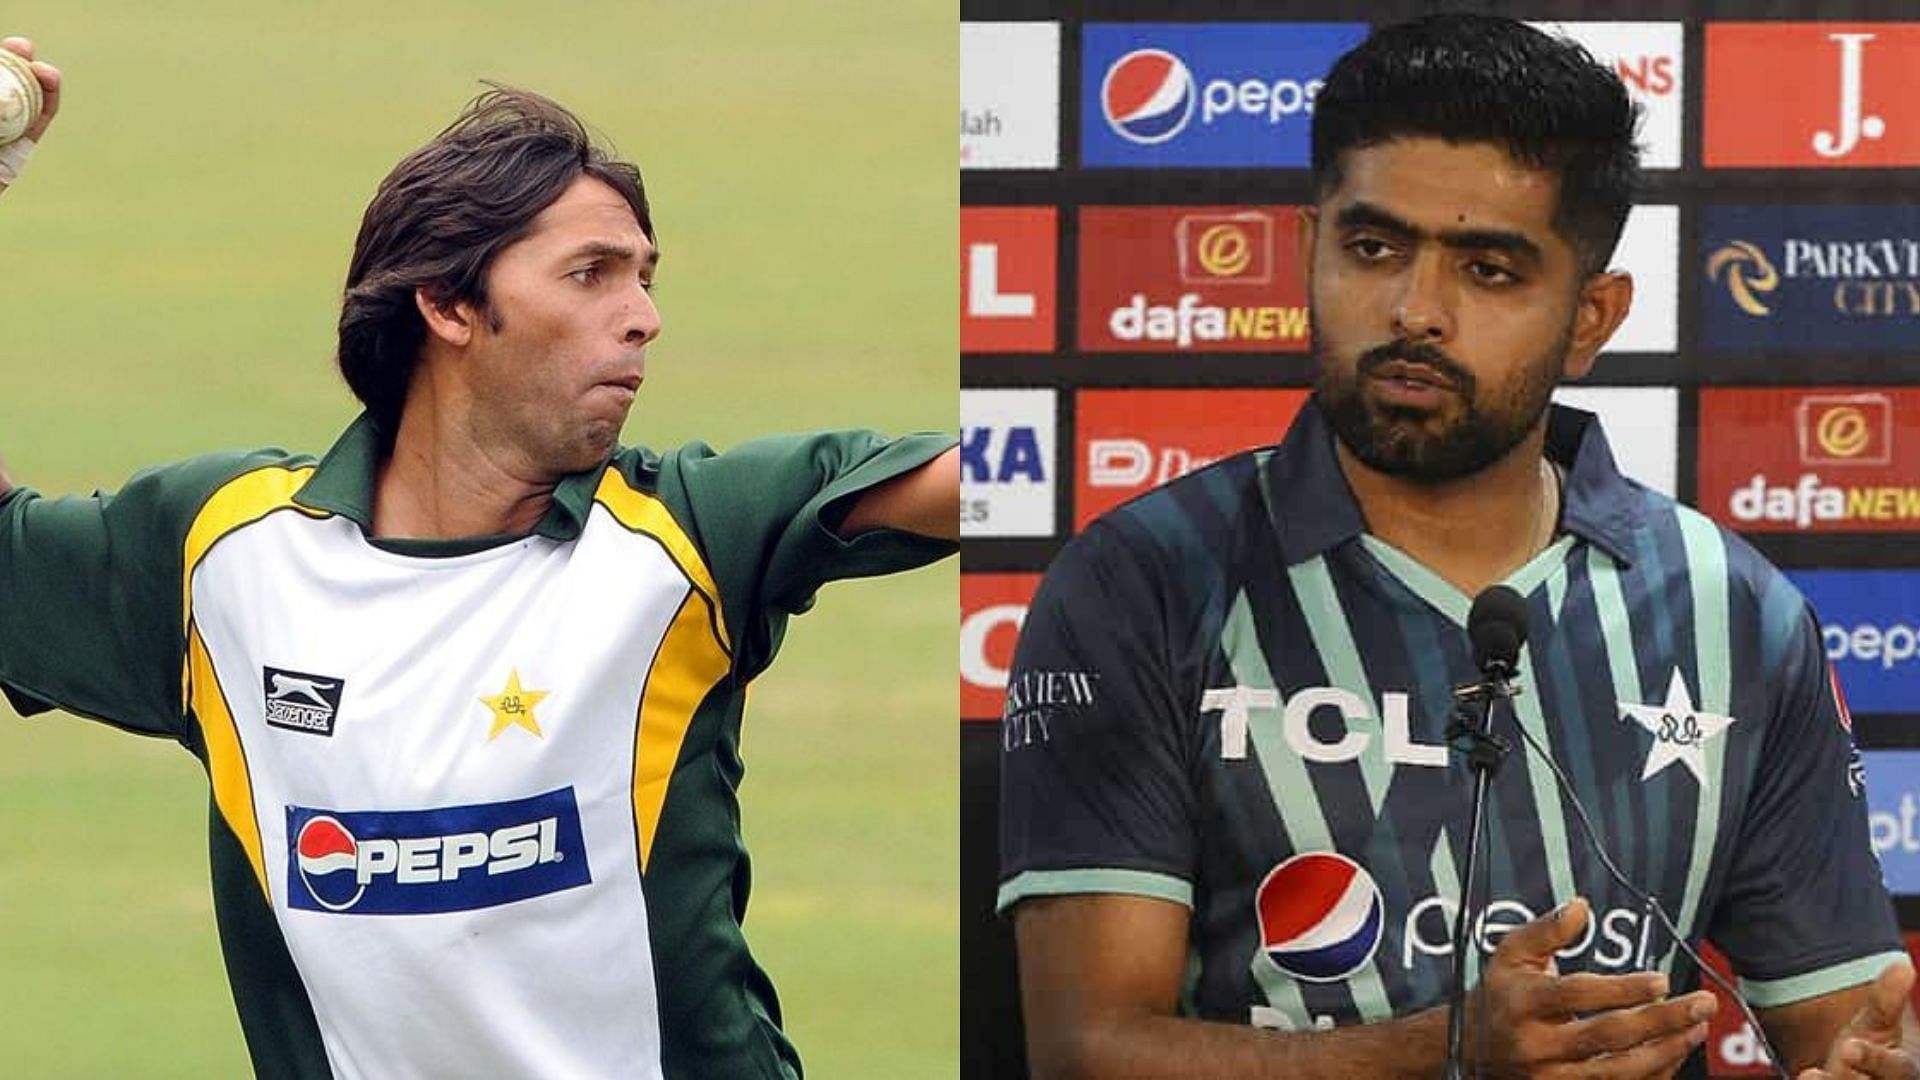 Mohammad Asif (L) and Babar Azam. (P.C.:Twitter)